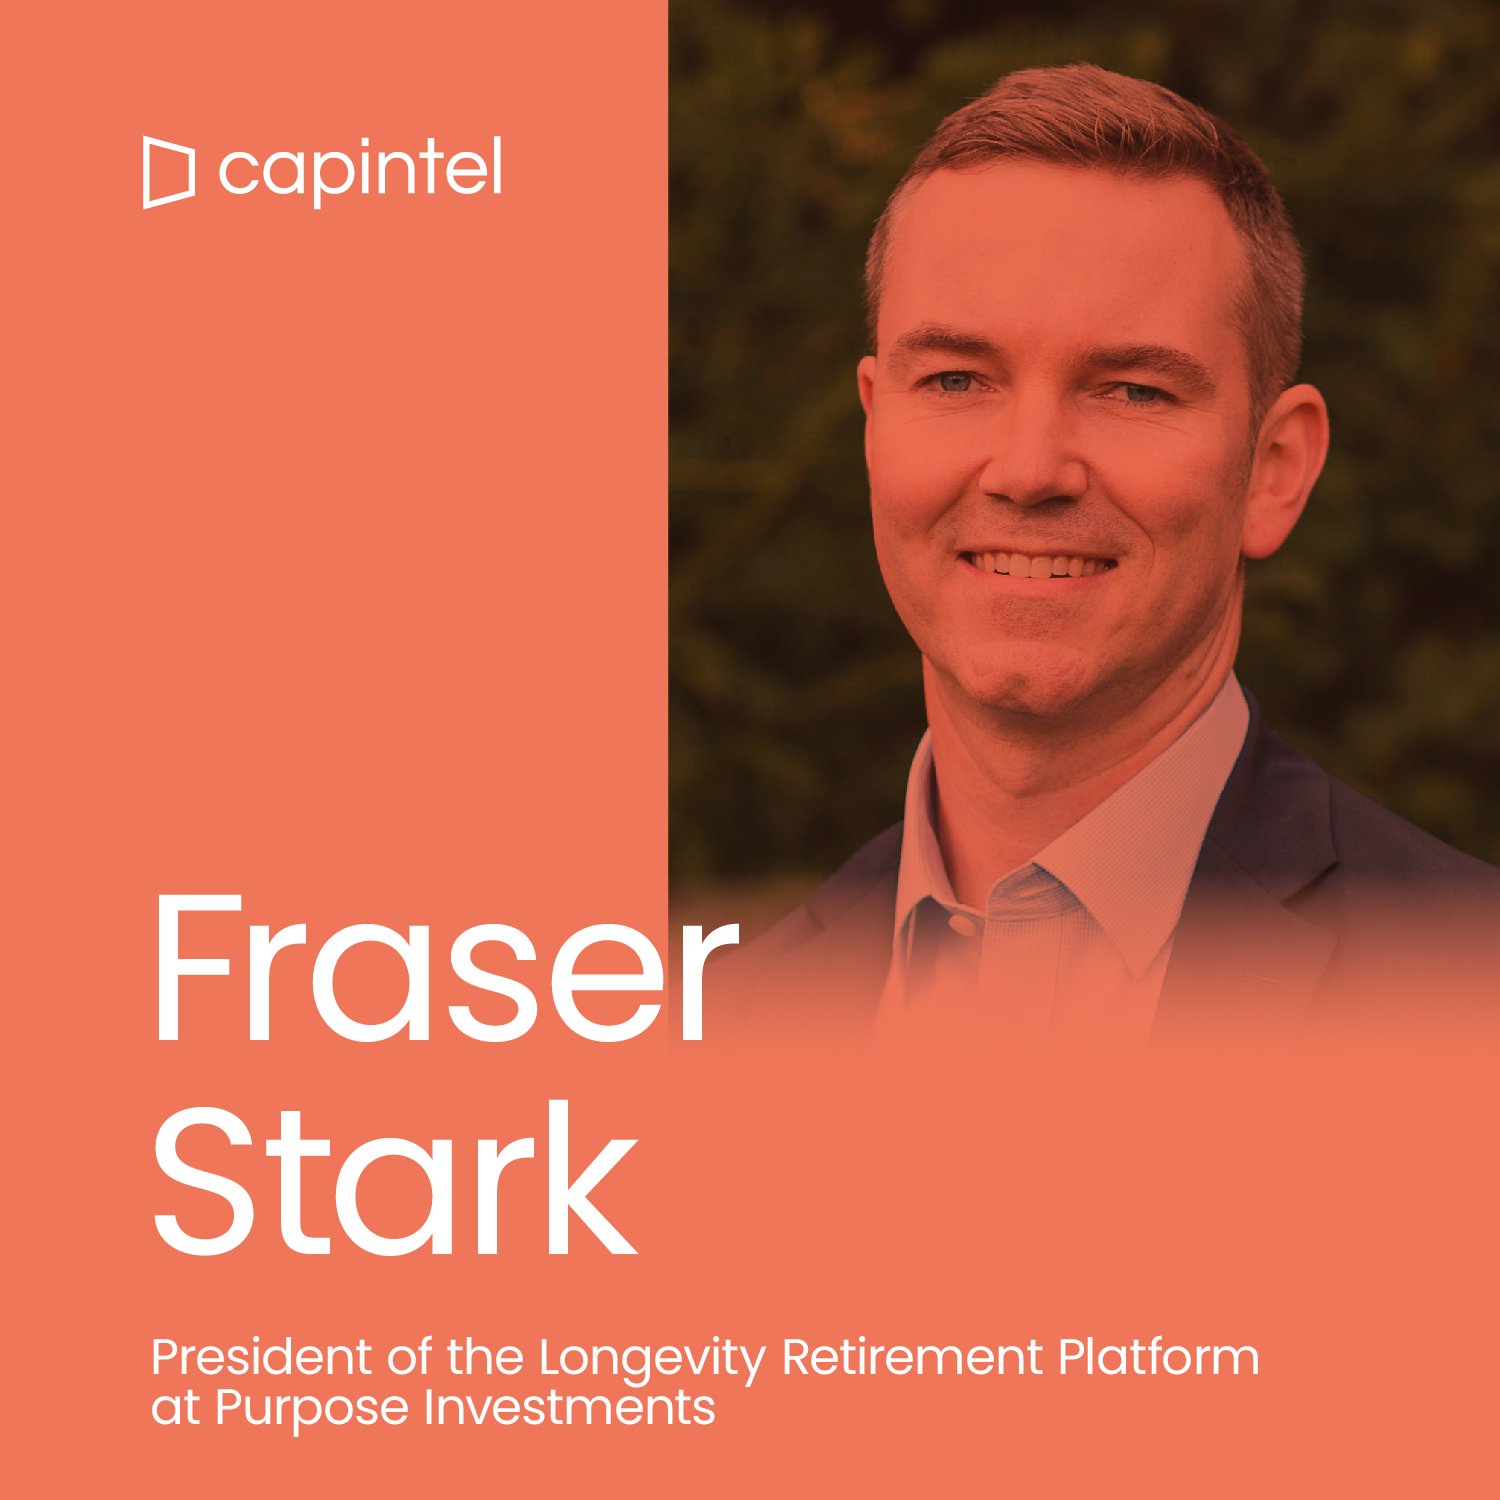 Planning for Longevity of Retirement Income: One Year Later, with Fraser Stark and Purpose Investments